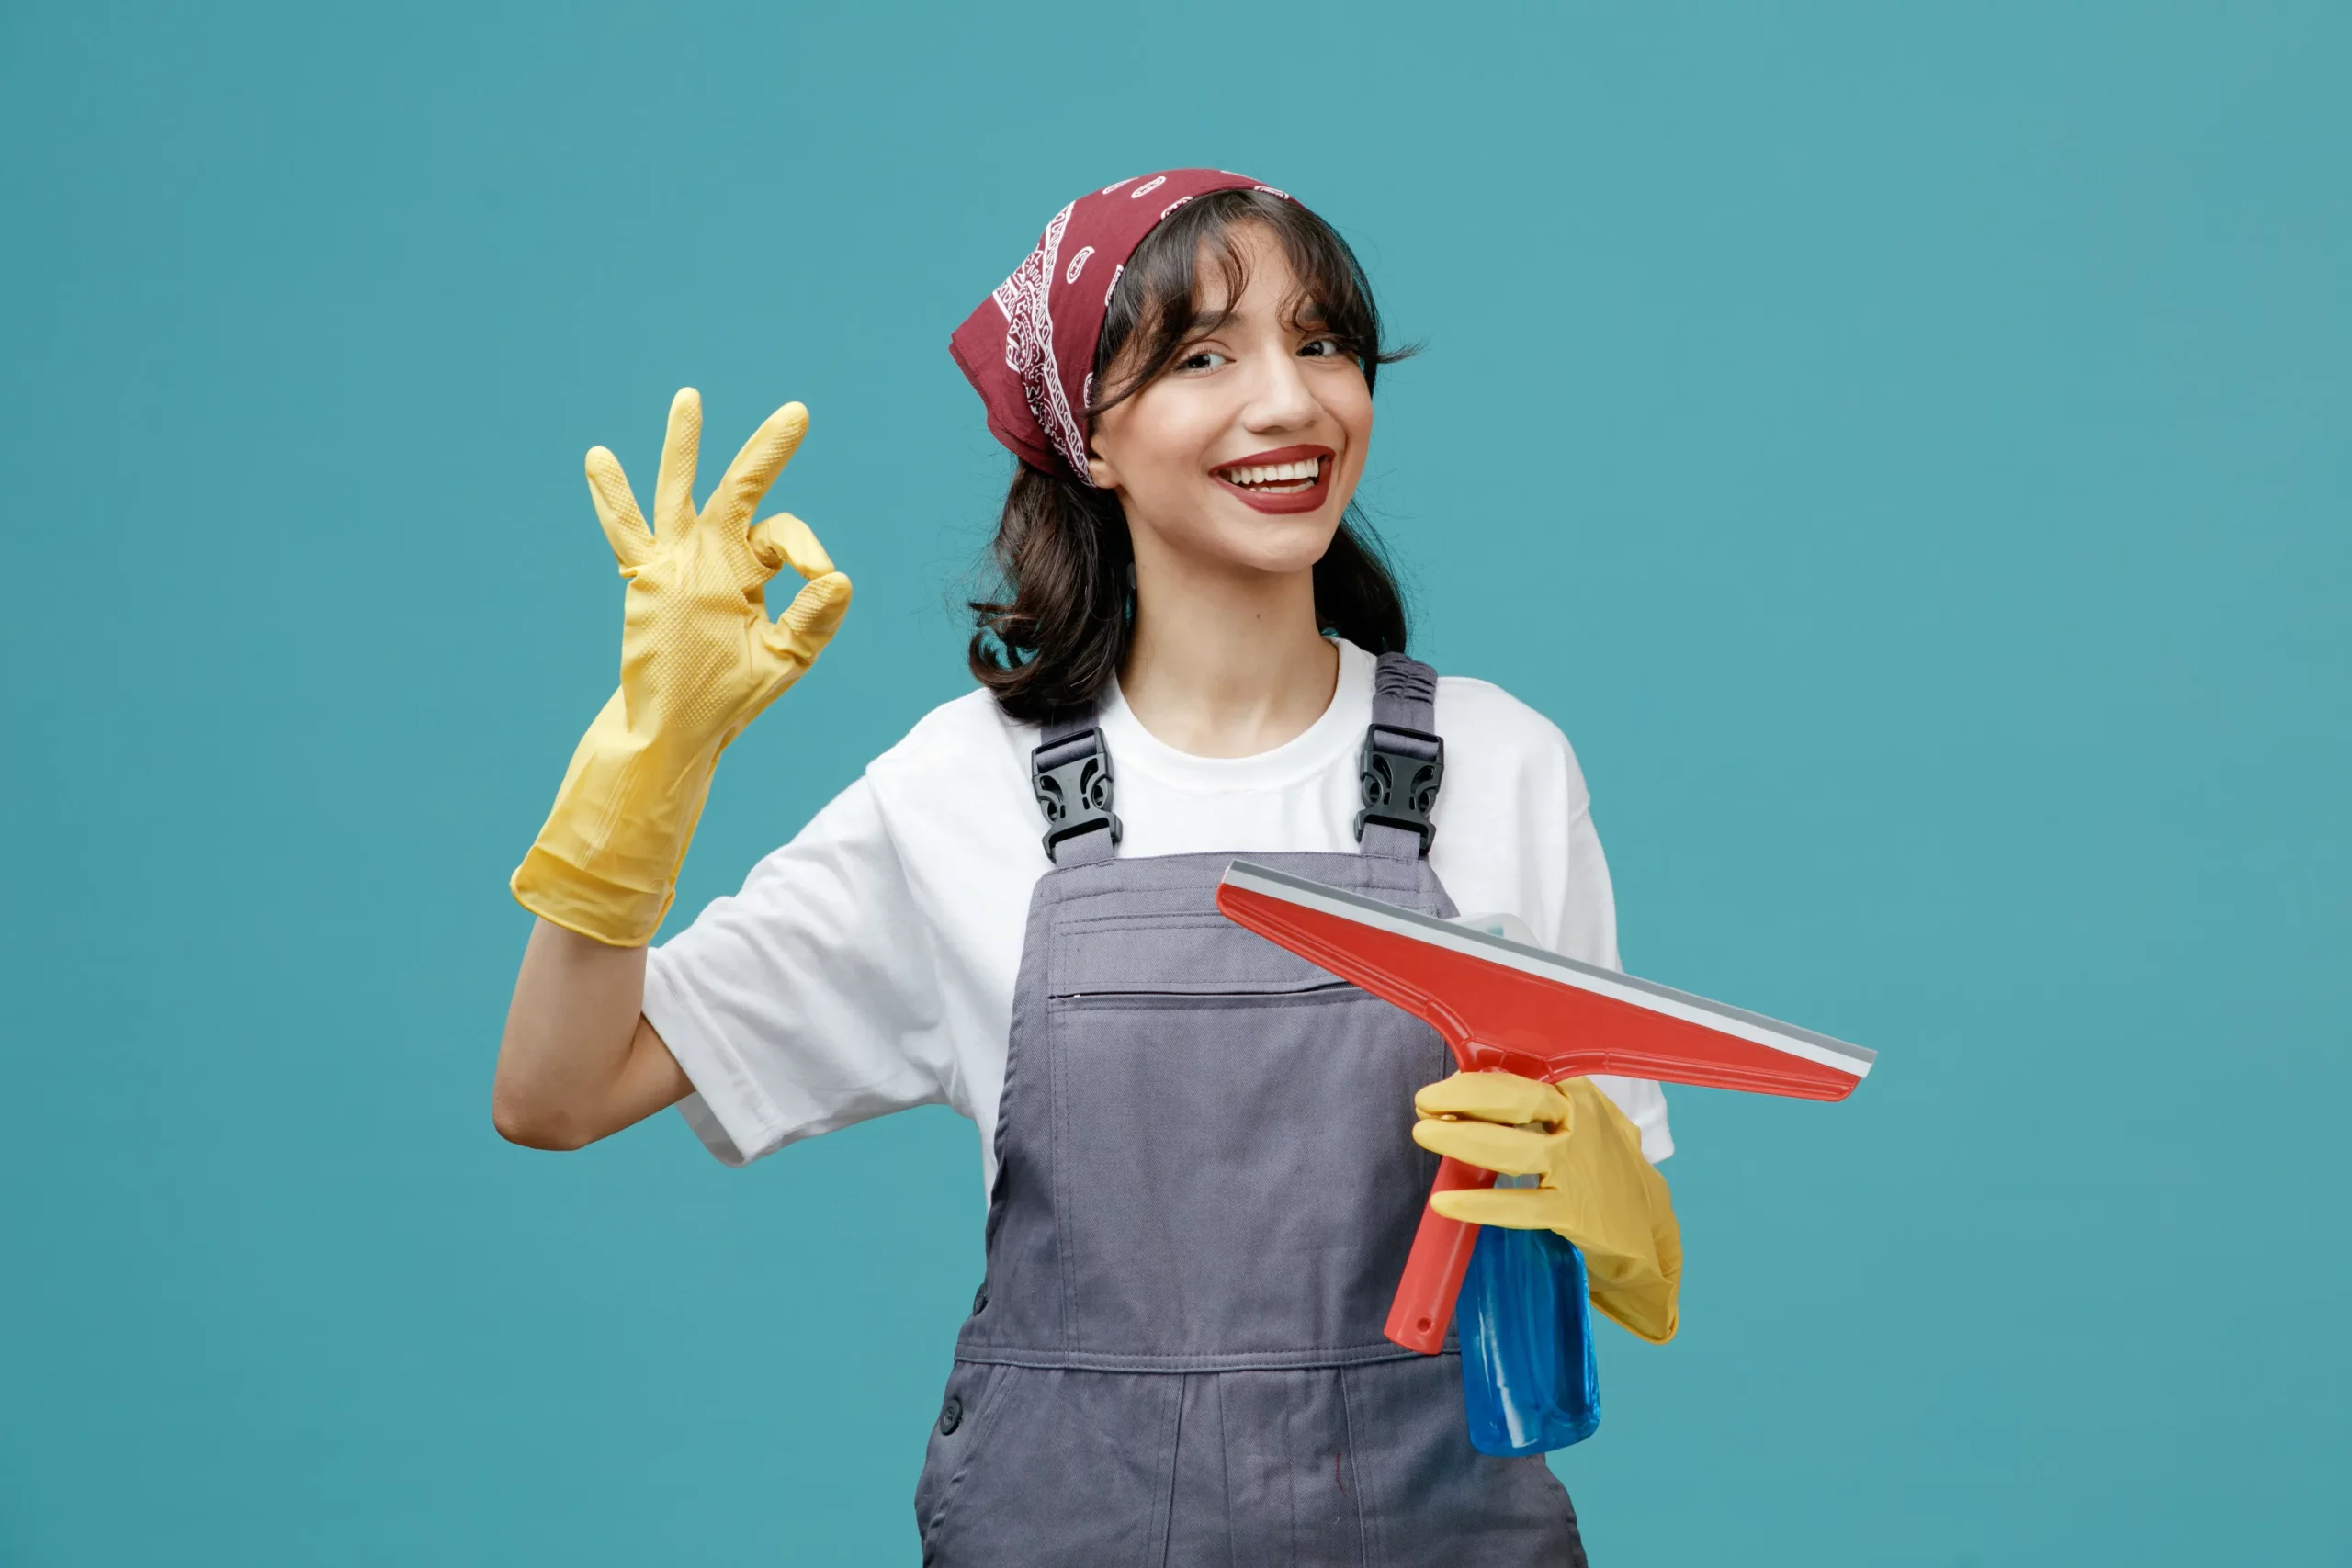 smiley female professional cleaner wearing a bandana and cleaning gloves while holding cleaning products